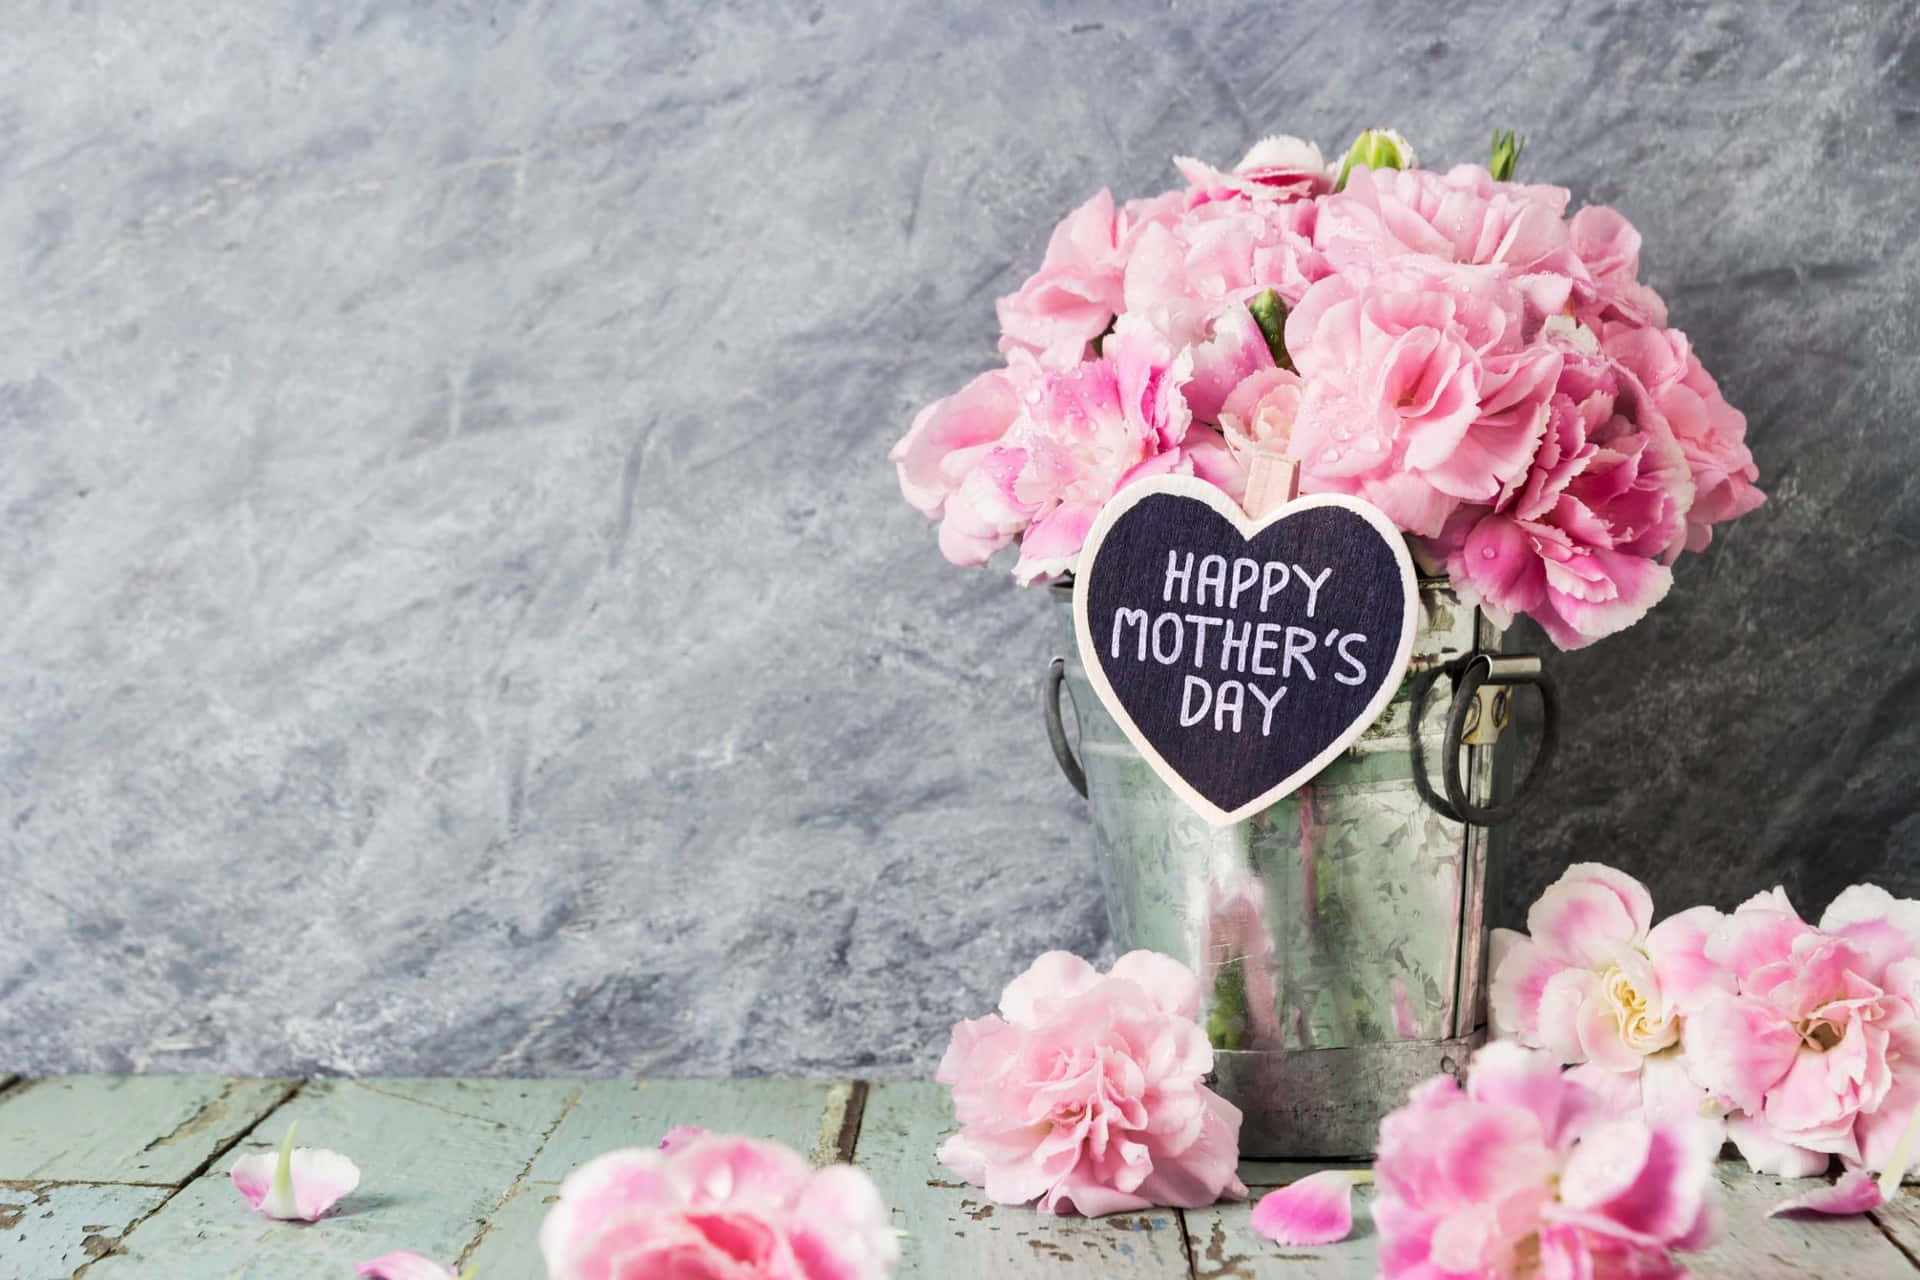 Happy Mother's Day With Pink Flowers In A Bucket